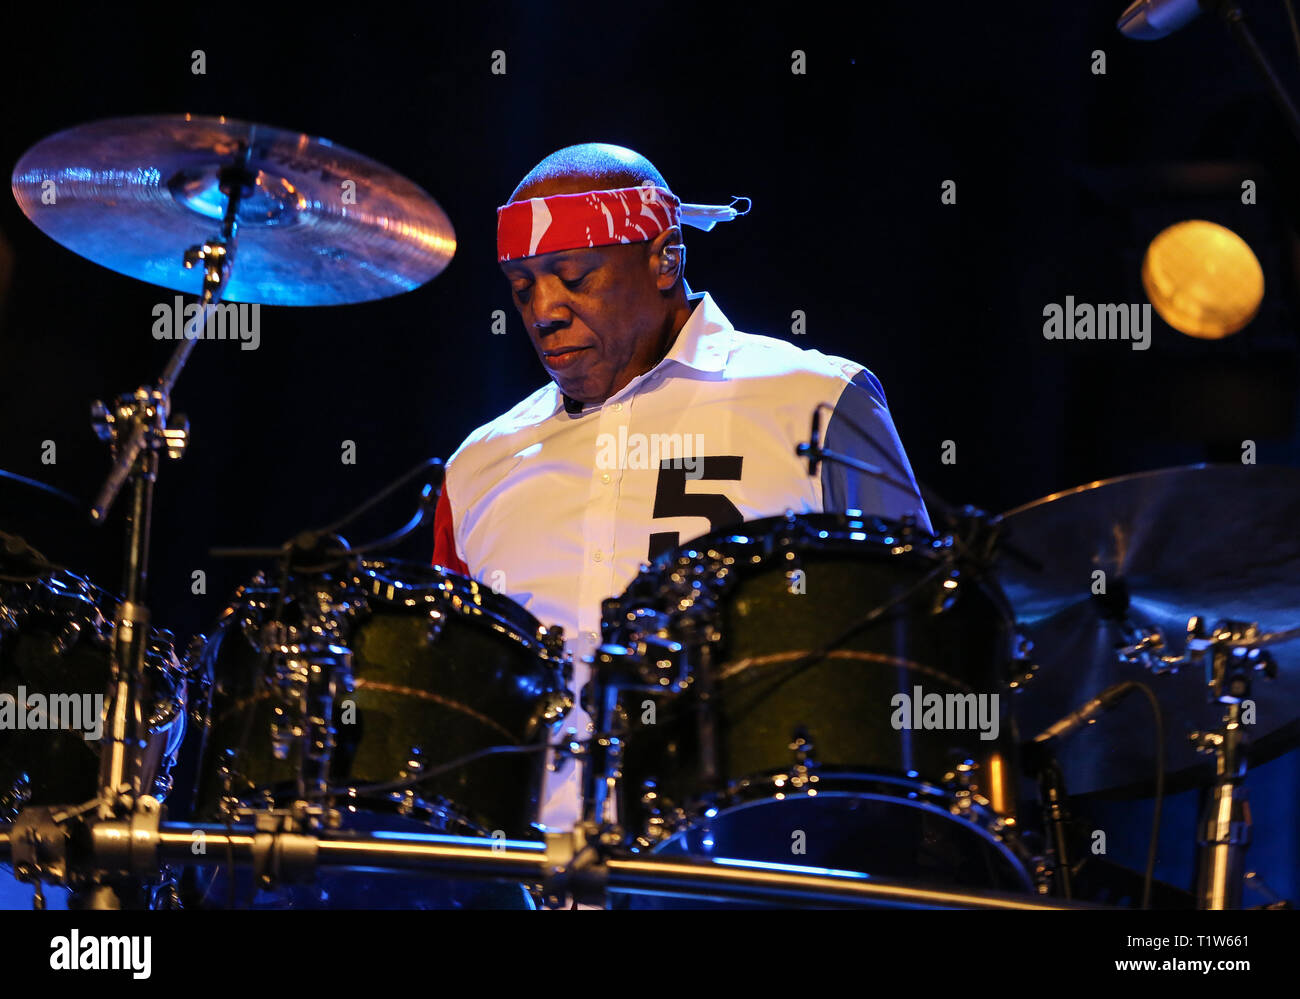 CRACOW, POLAND - MARCH 16, 2016: Famous American drummer Billy Cobham live on stage in ICE Cracow, Poland Stock Photo